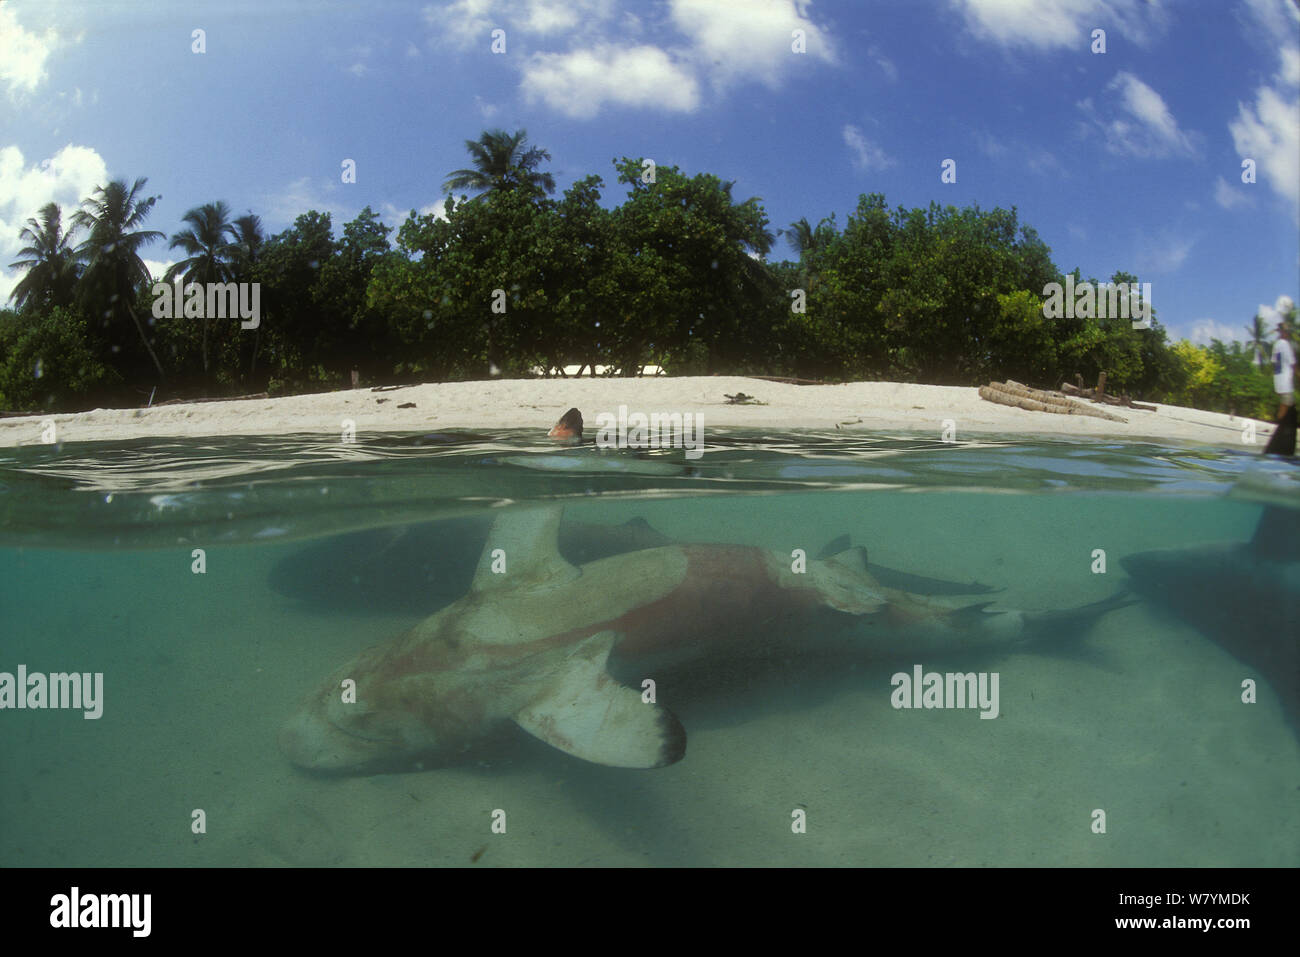 Sharks killed for their fins, Himmendhoo island, Ari Atoll, Maldives, Indian Ocean.  1998 Stock Photo